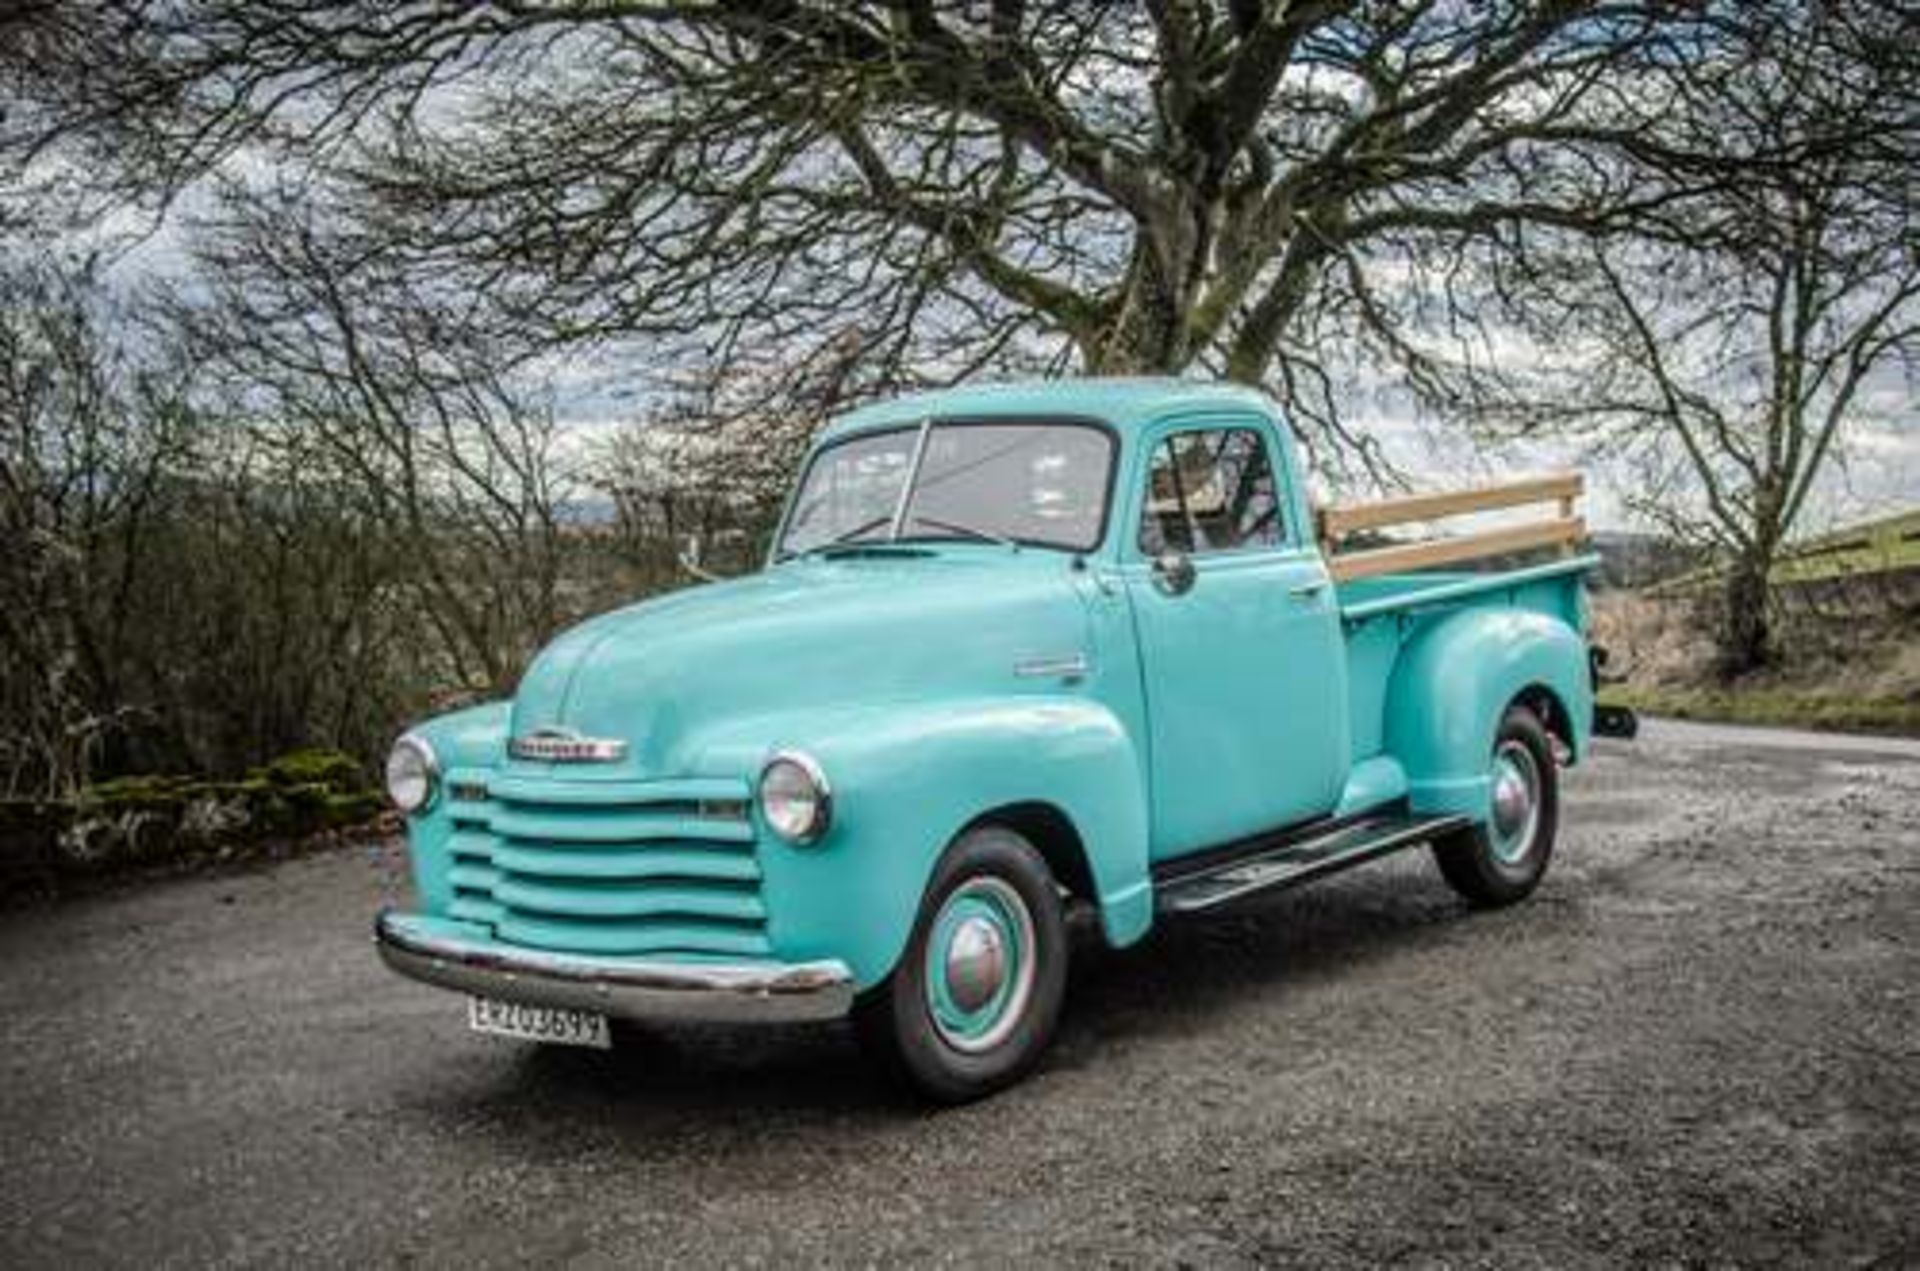 CHEVROLET 3100 PICK UP - 3500cc - Image 2 of 16